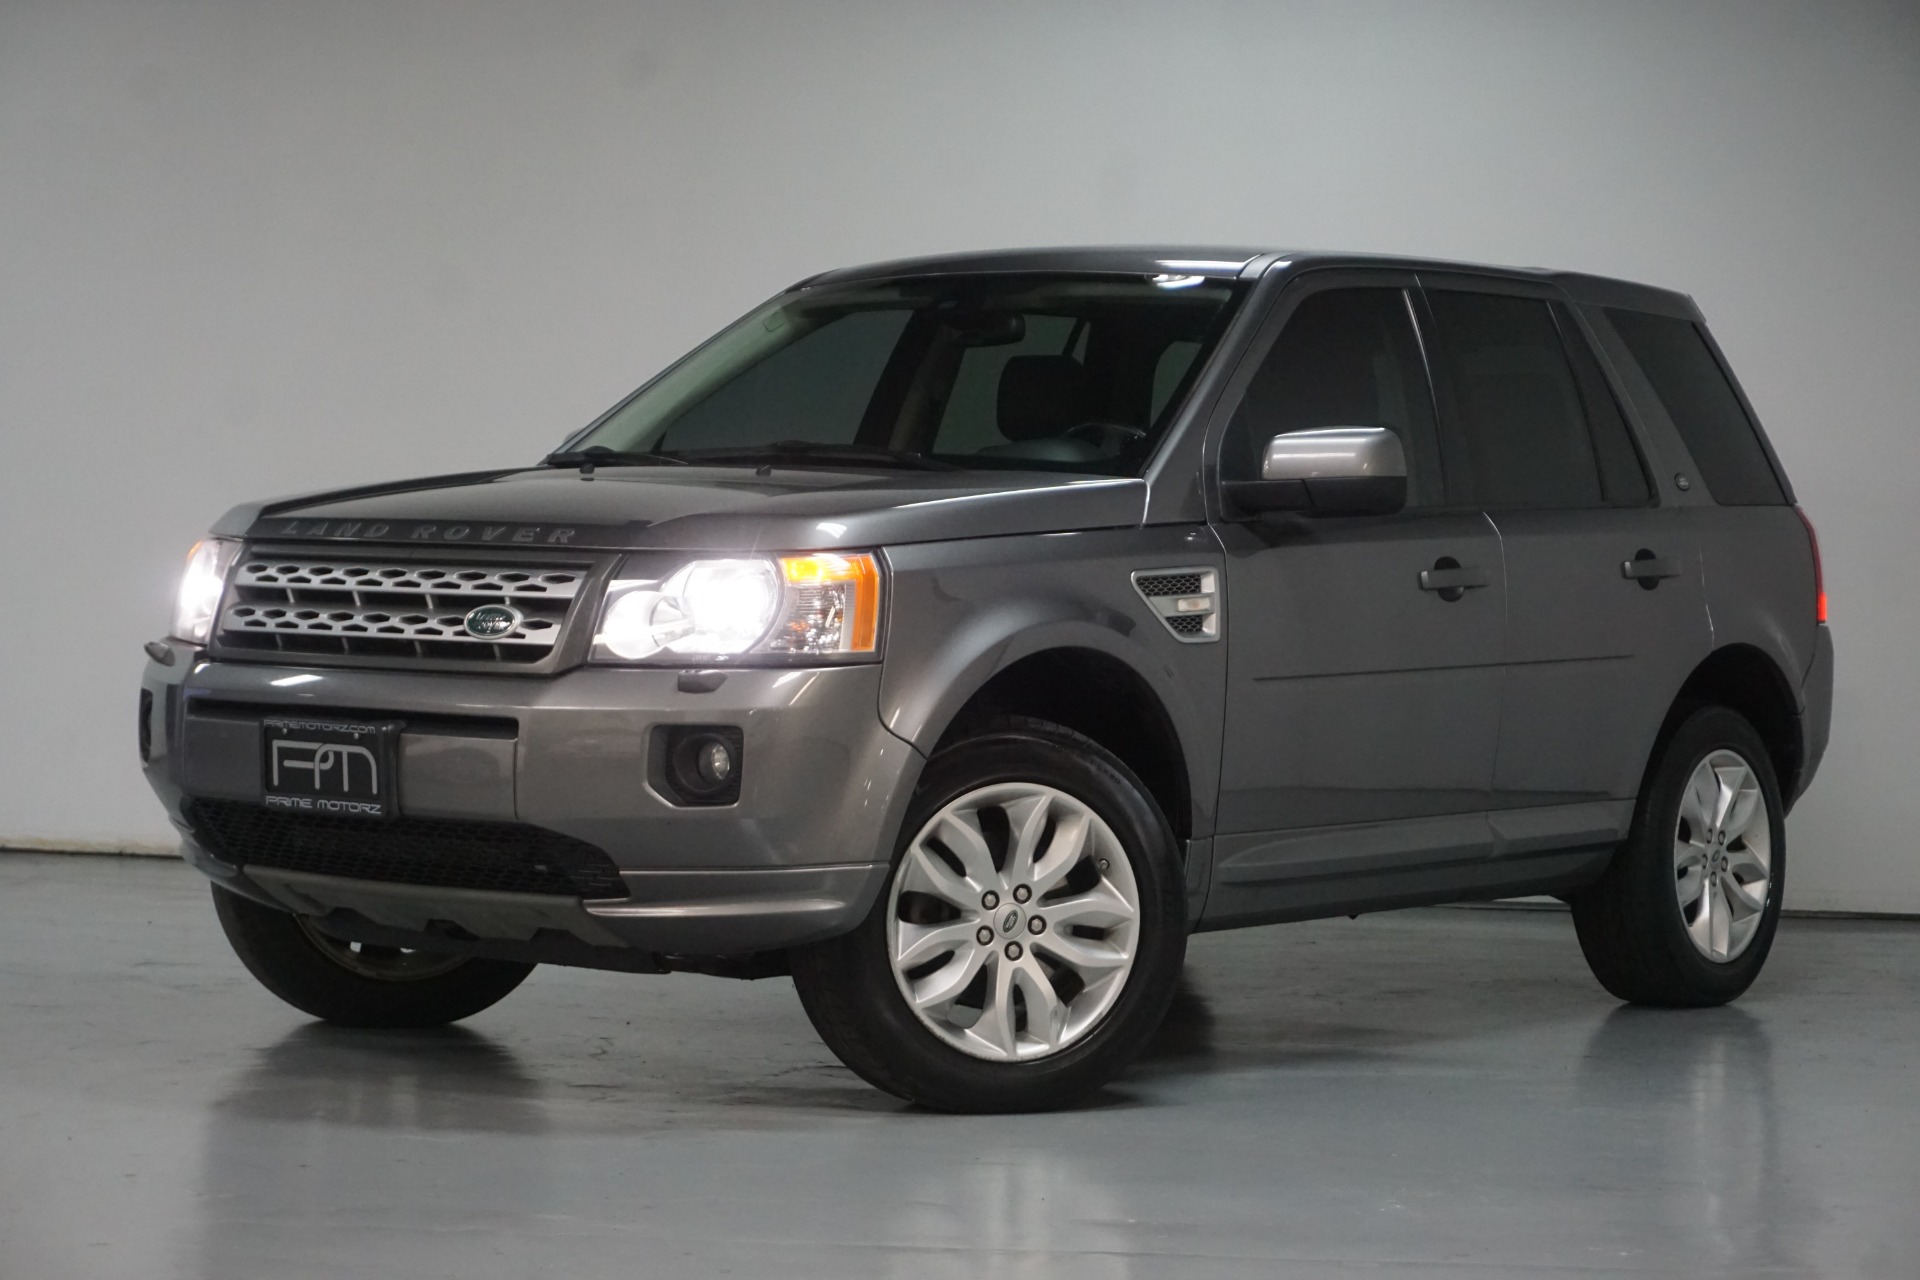 Used 2011 Stornoway Grey Metallic Land Rover LR2 For Sale (Sold) | Prime  Motorz Stock #2599